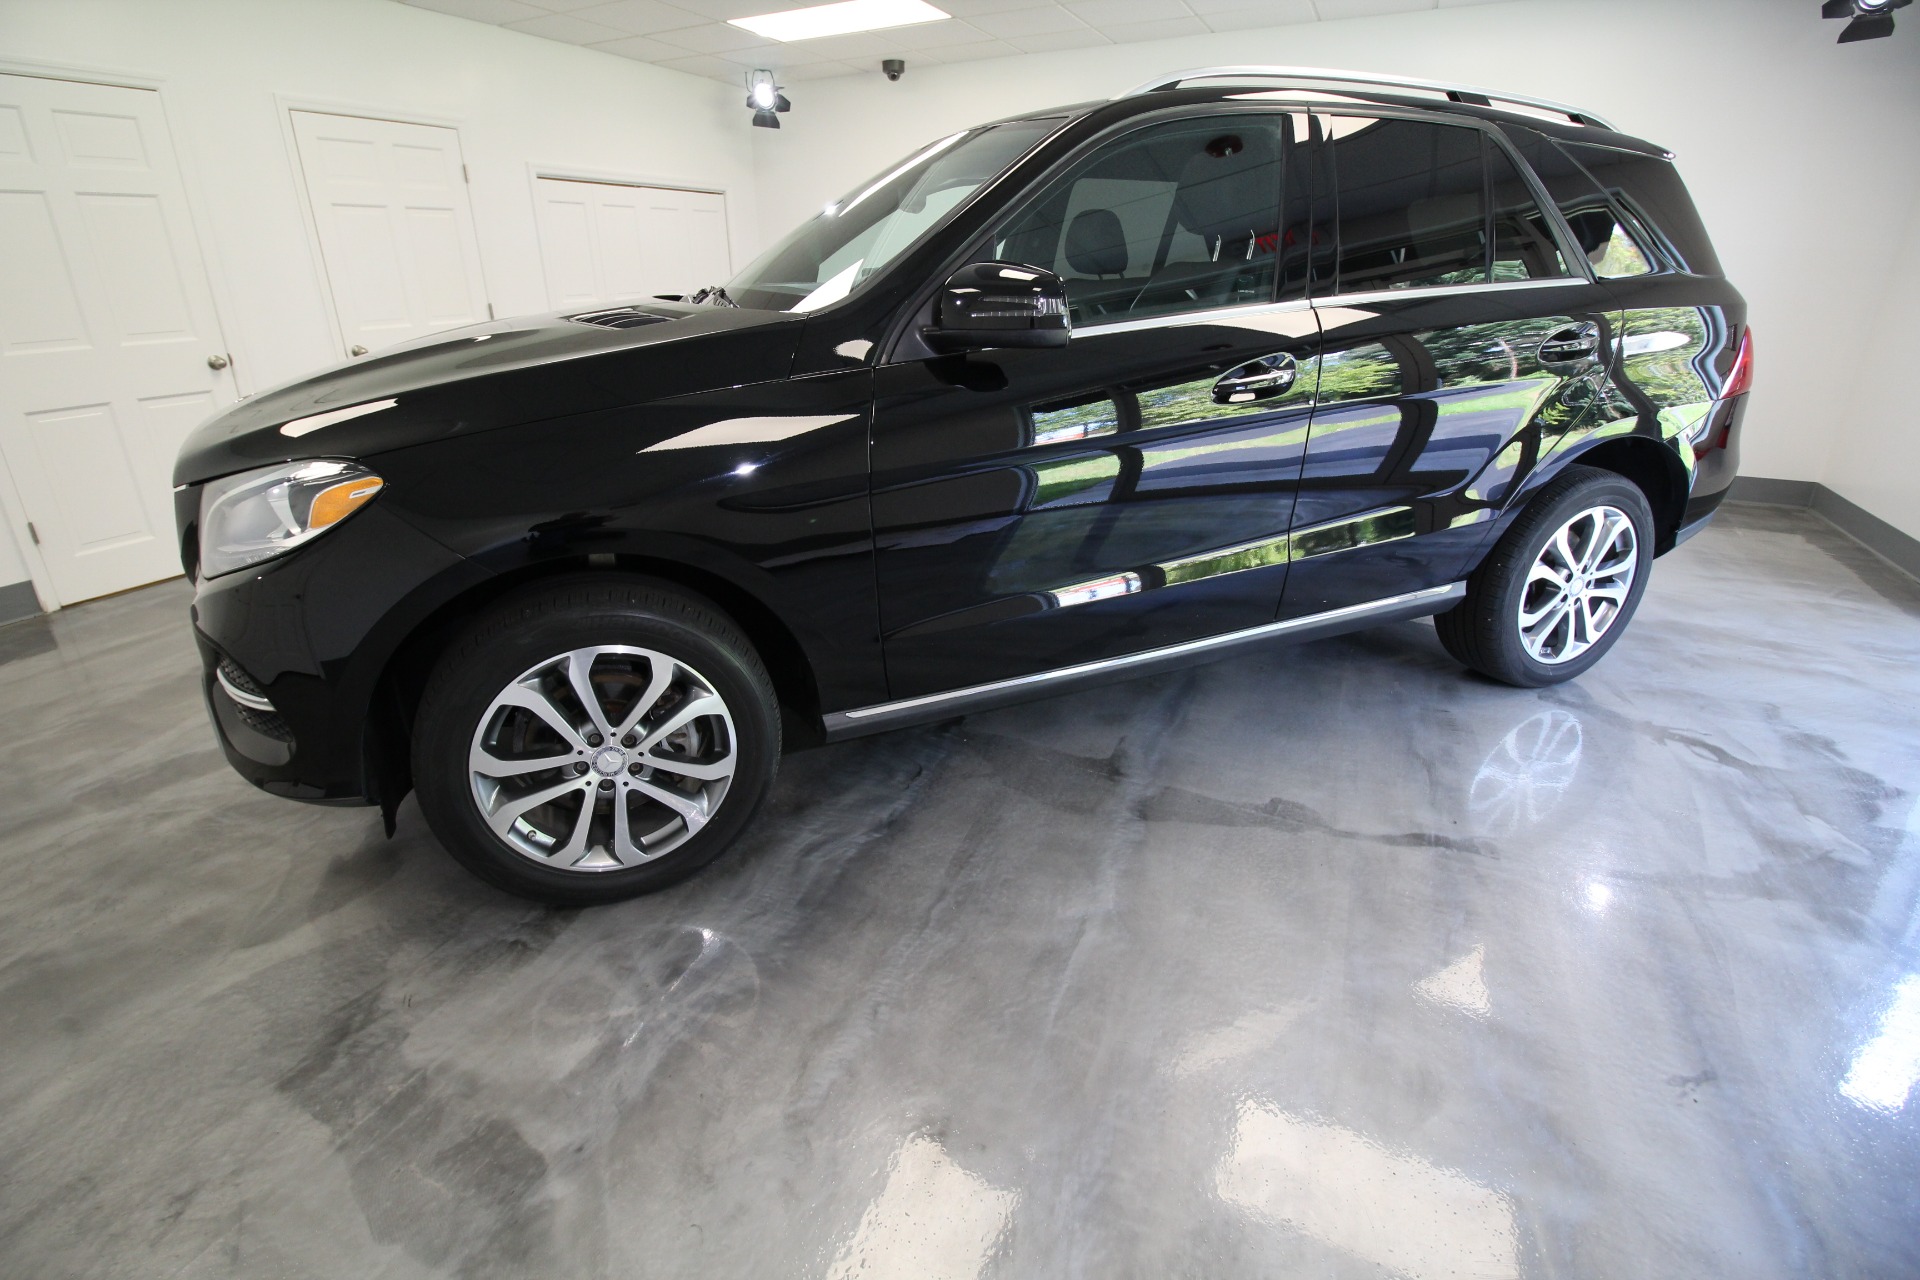 Used 2016 Black Mercedes-Benz GLE-Class GLE350 4MATIC 1 OWNER SUPERB LOADED WITH OPTIONS | Albany, NY